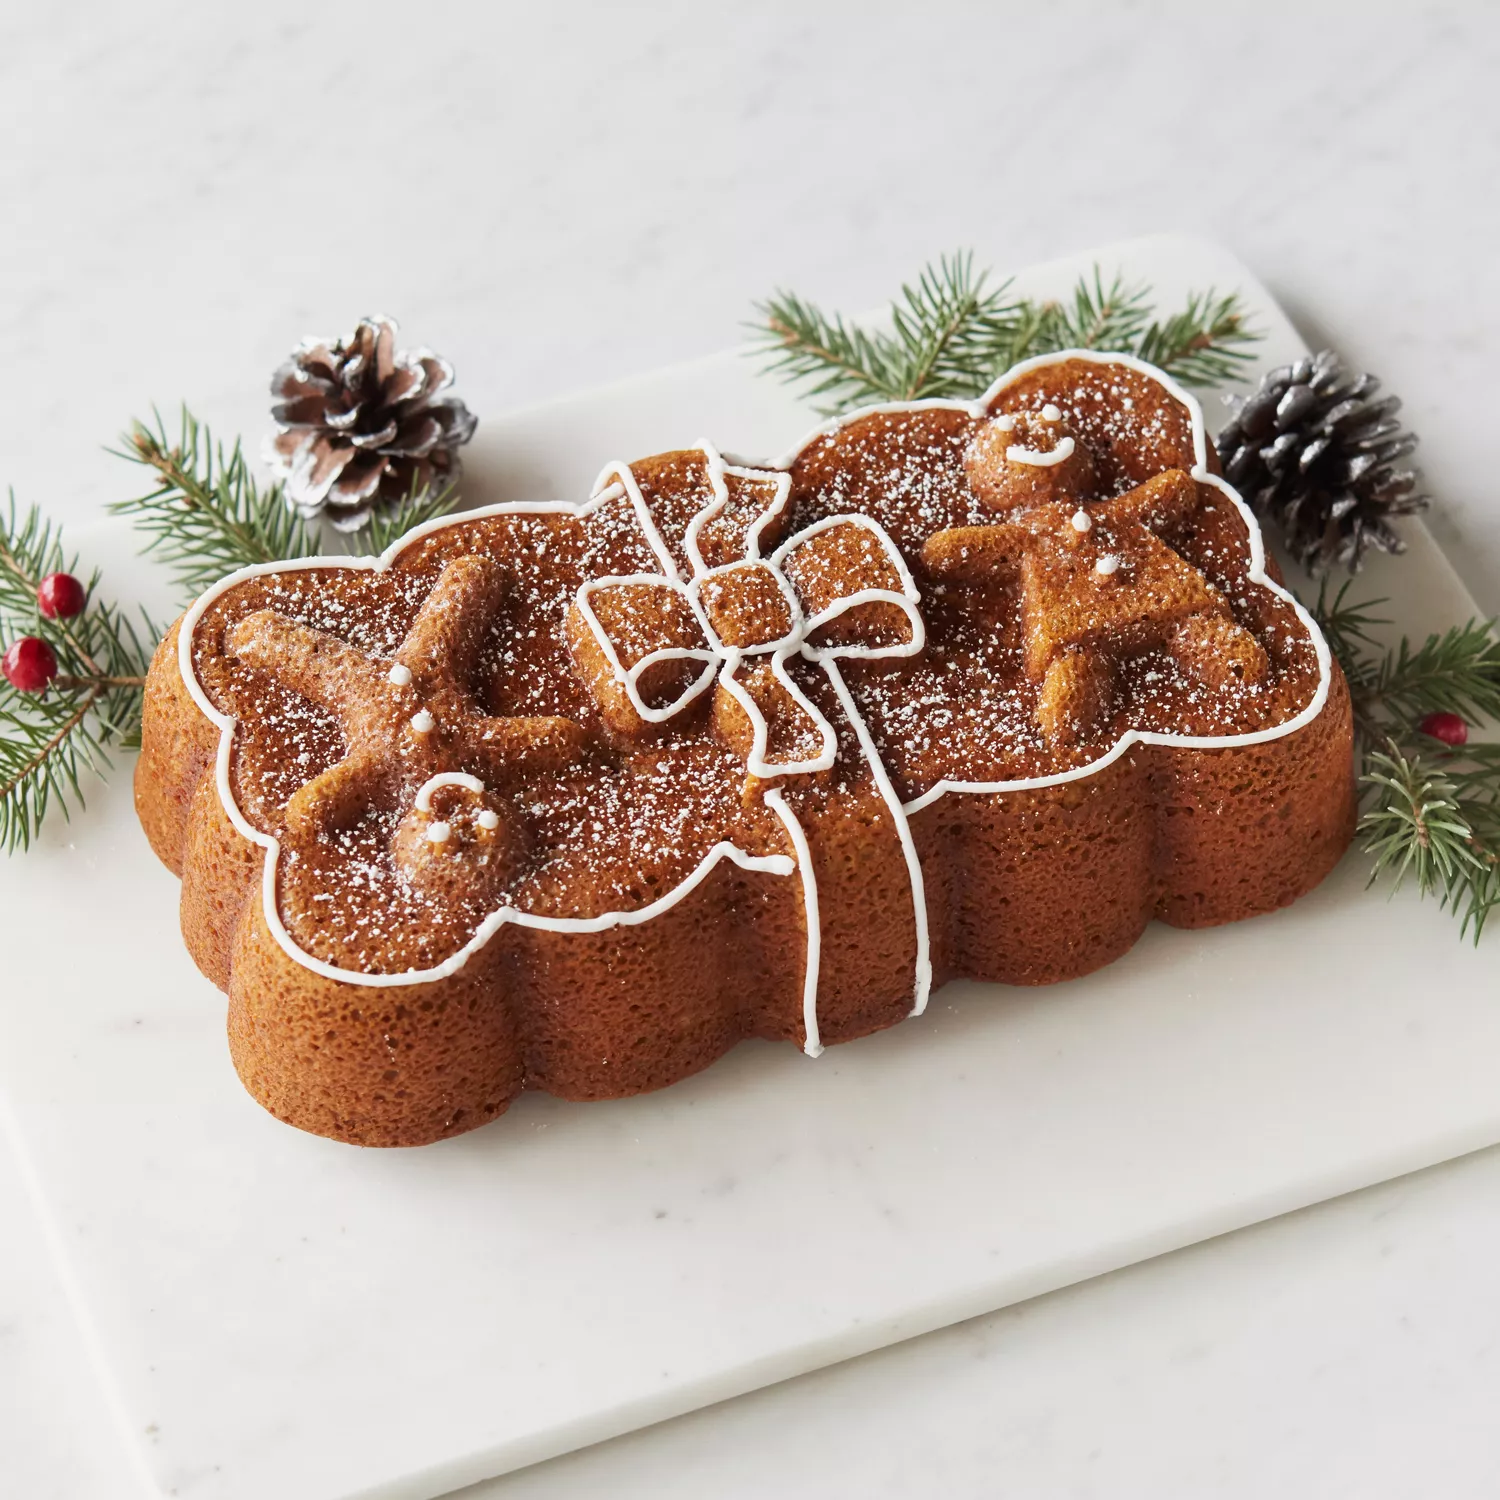 Nordic Ware Gingerbread Loaf Pan, one size, …